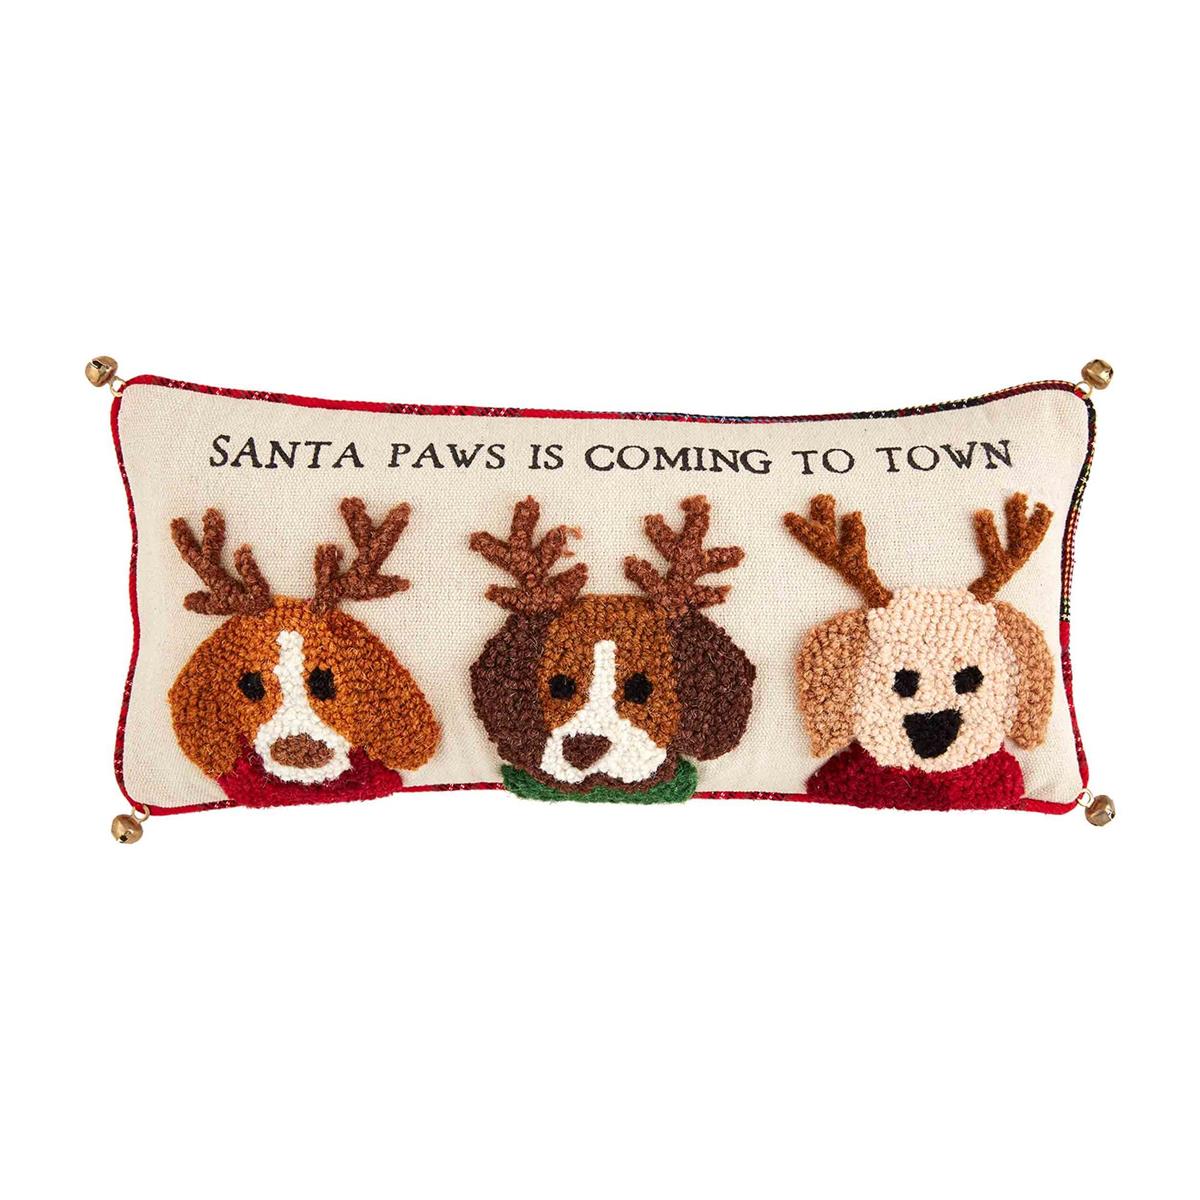 Santa Paws is Coming to Town Pillows